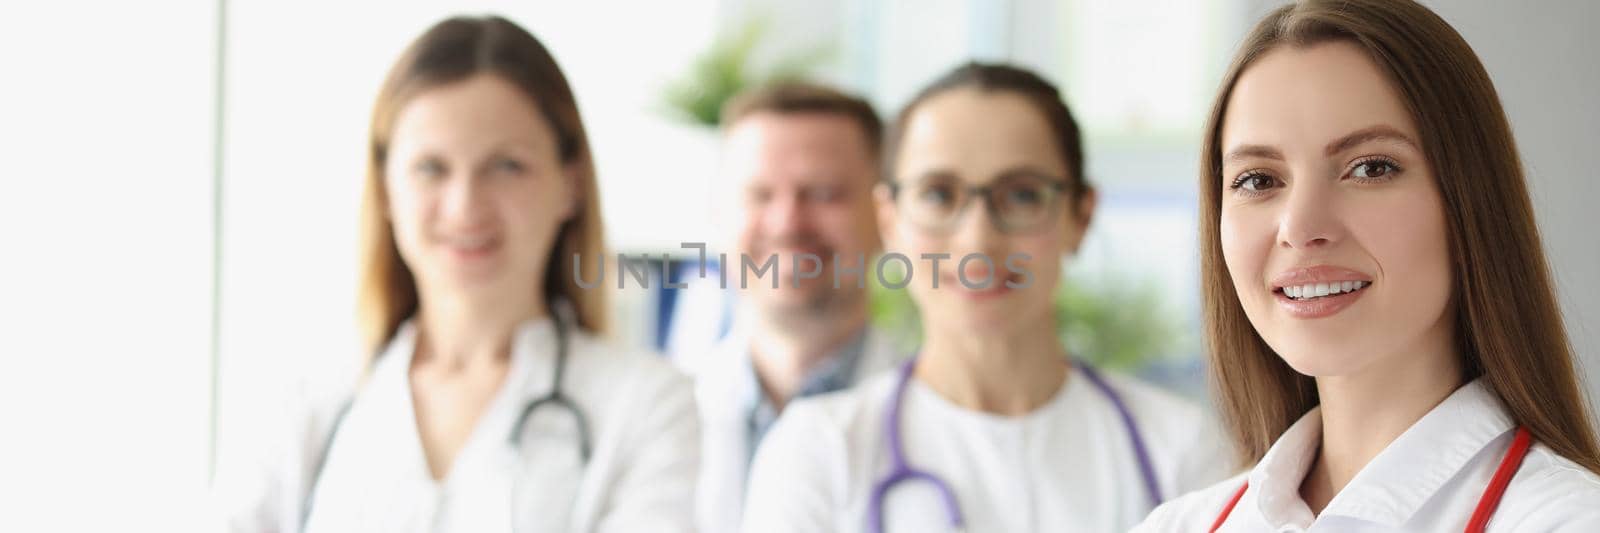 Focus on cute smiling woman therapist posing with colleagues. Physicians in white gowns with stethoscopes. Team of doctors idea. Medicine and healthcare concept